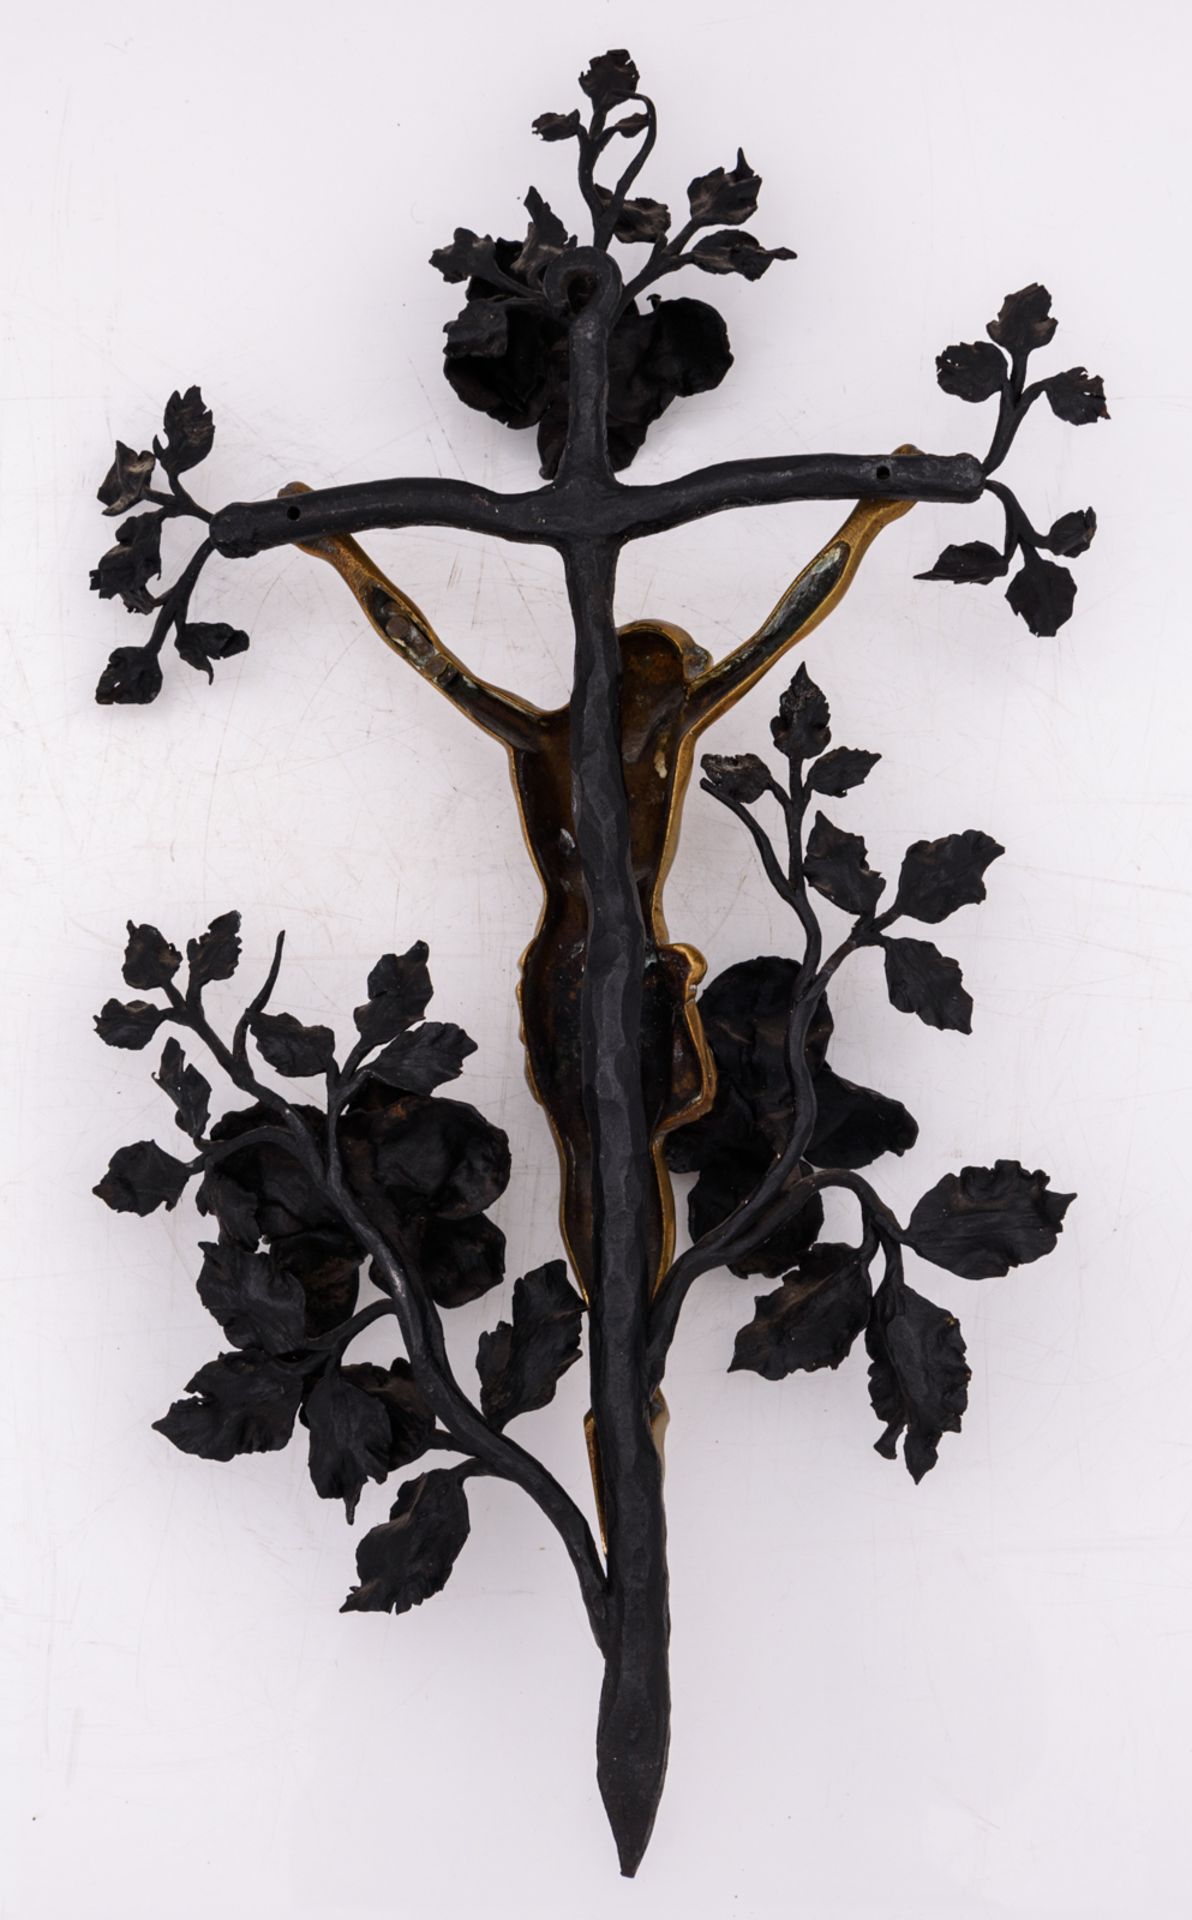 Van Boeckel L., a polished bronze corpus on a wrought iron crucifix with flower decoration, H 80 - W - Image 2 of 3